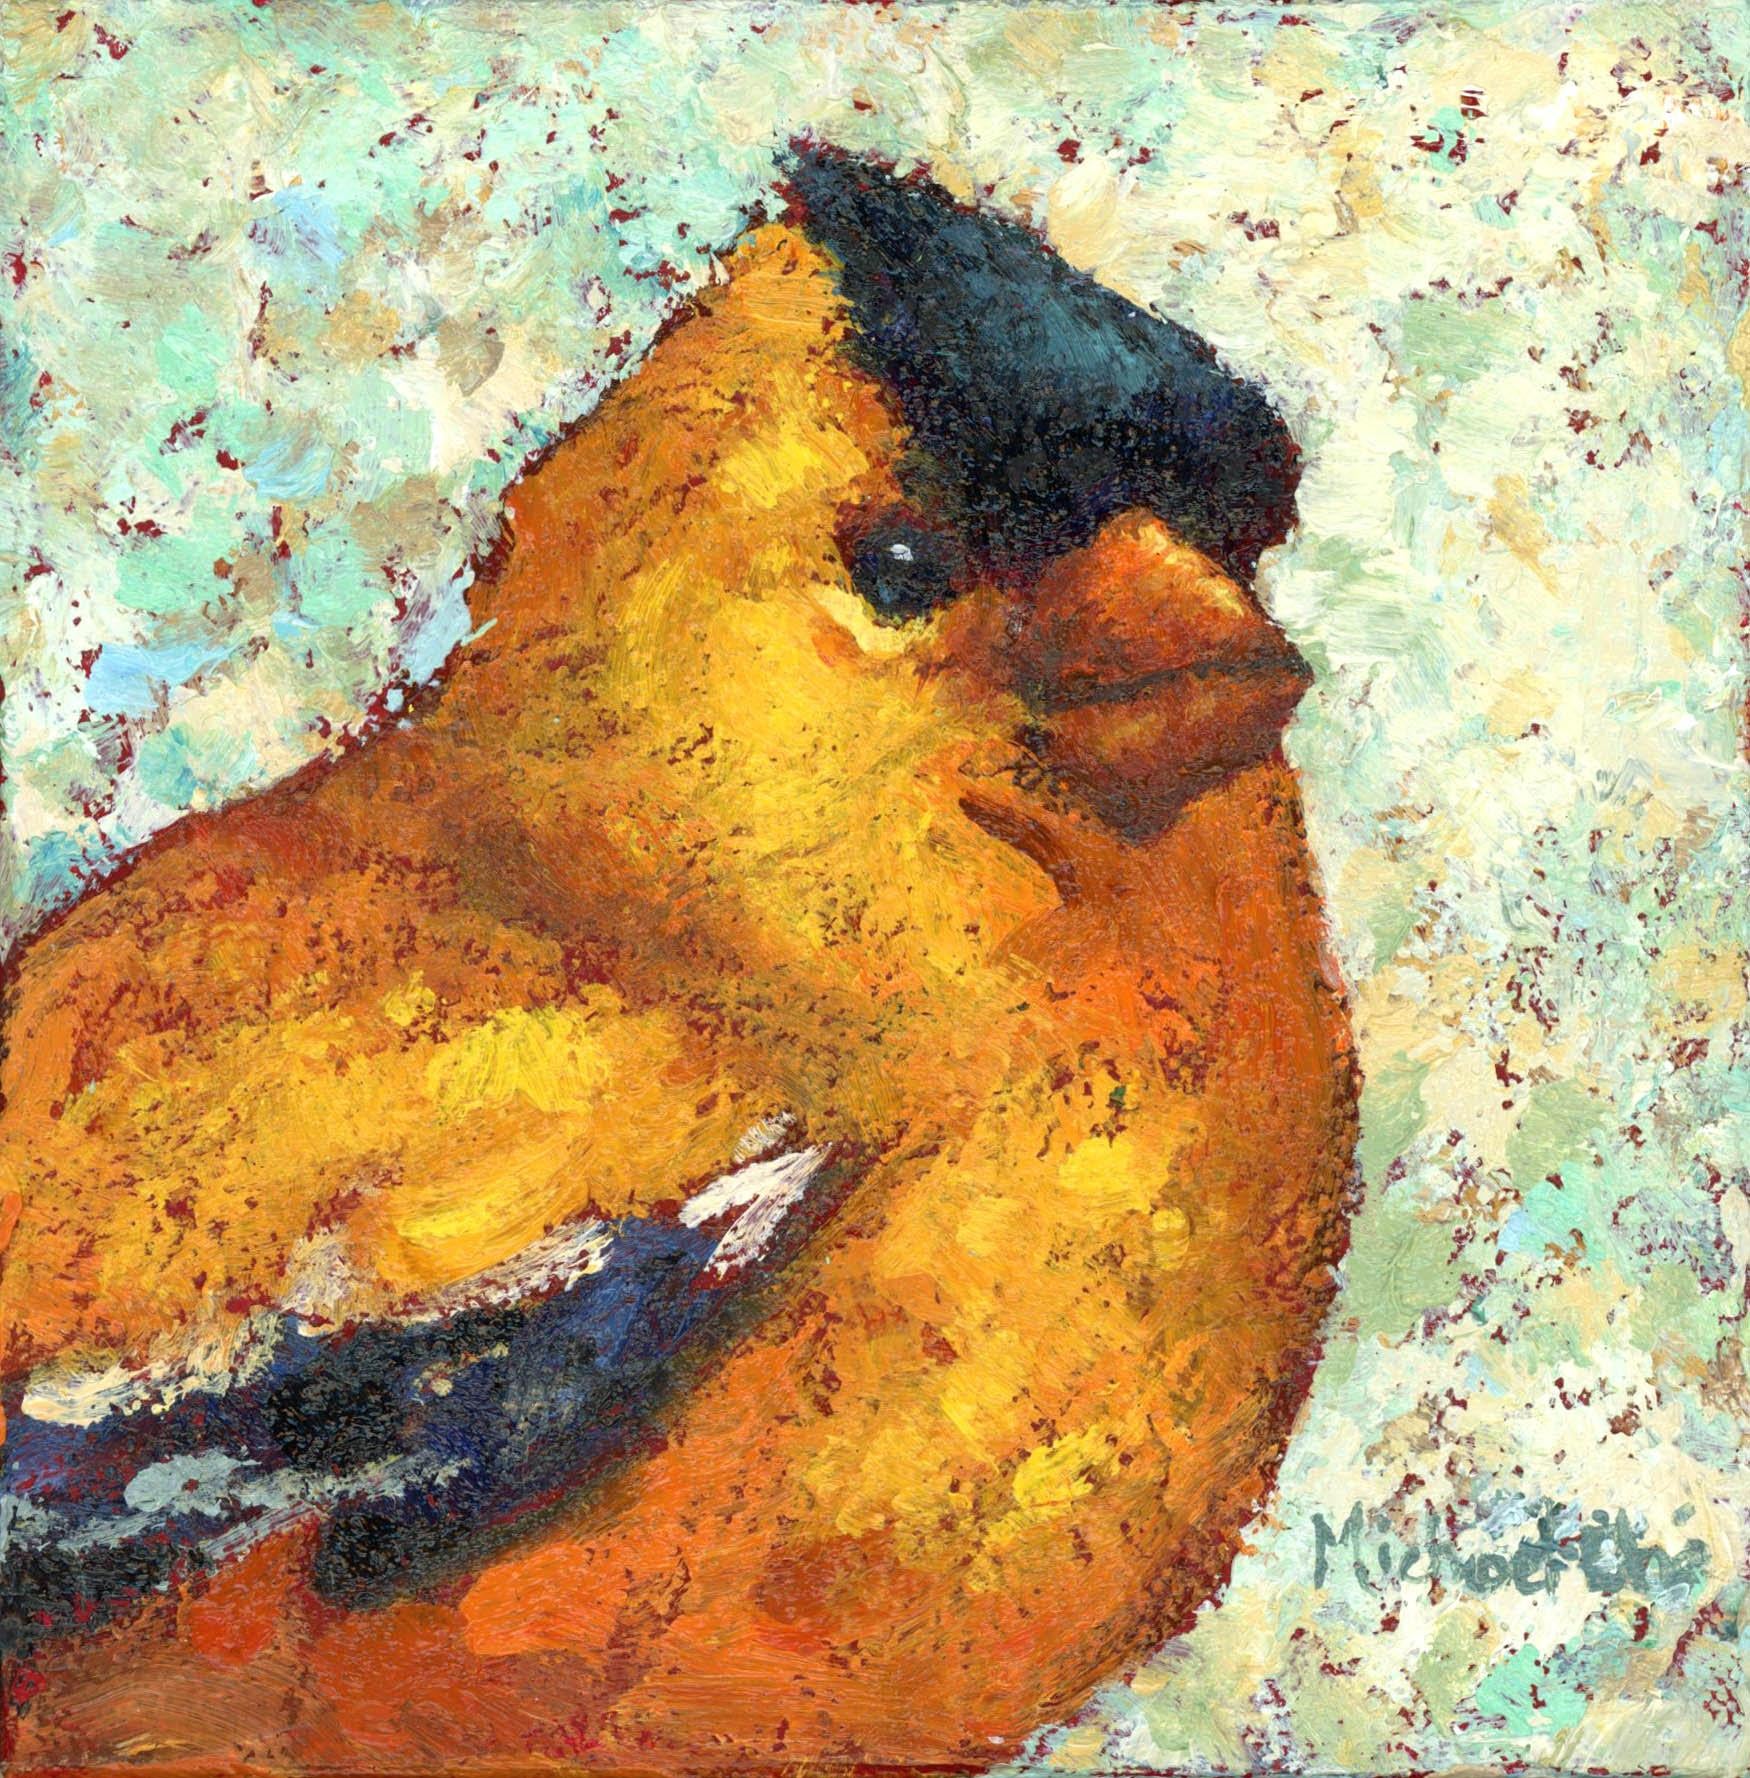 Michael-Che Swisher Animal Painting - "Lots of Laughs" Impasto oil painting of a yellow and black bird